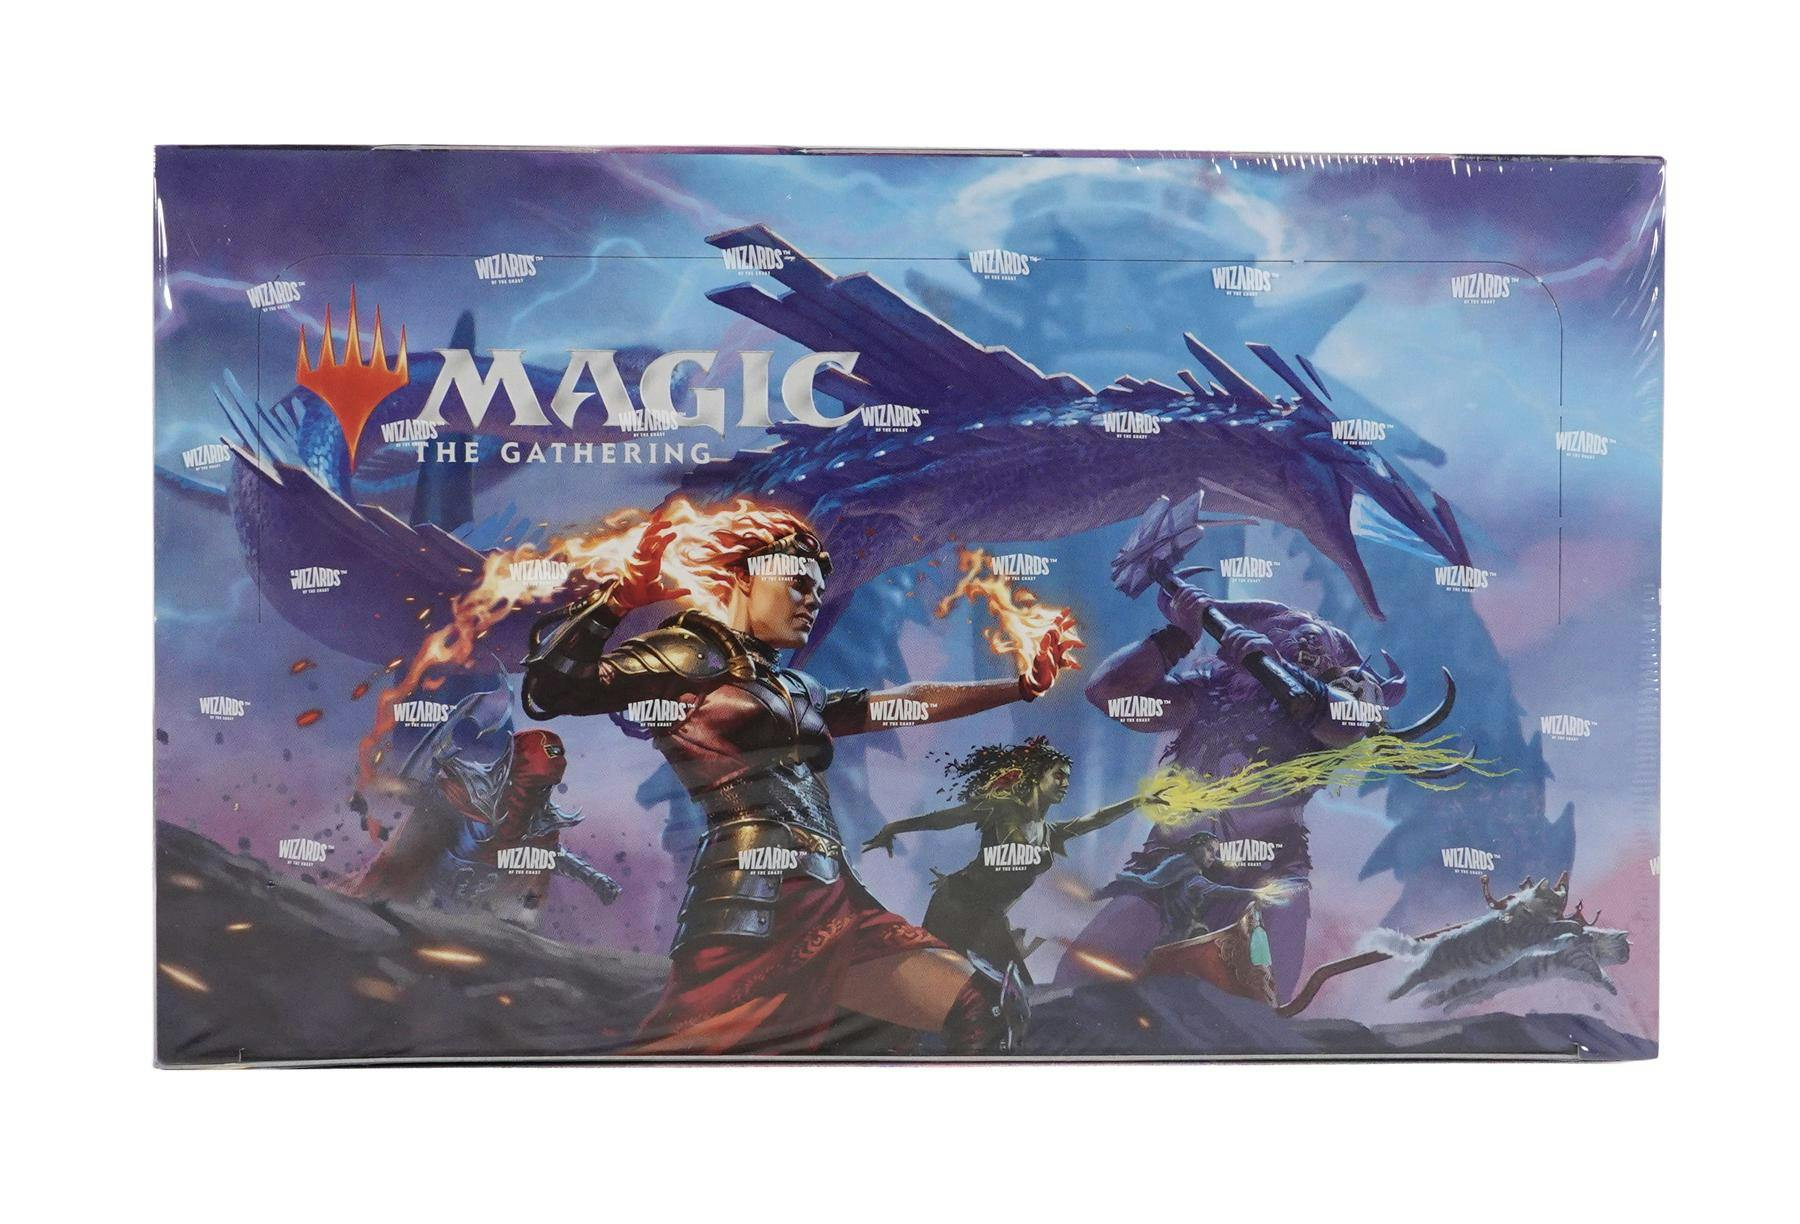 Wizards of the Coast Magic: The Gathering March of the Machine Draft Booster